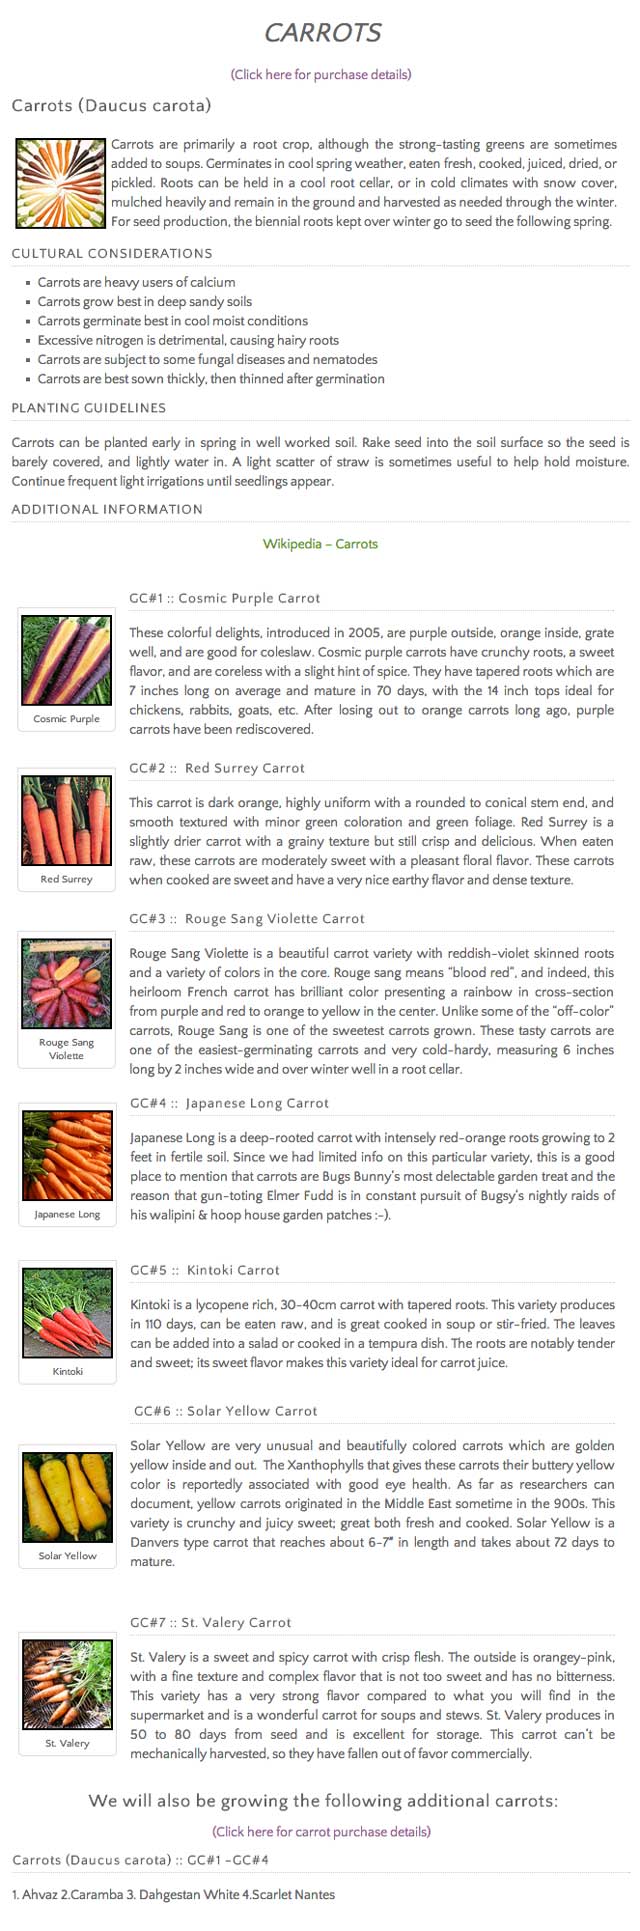 heirloom carrots, large-scale gardening, One Community, People Making a Difference